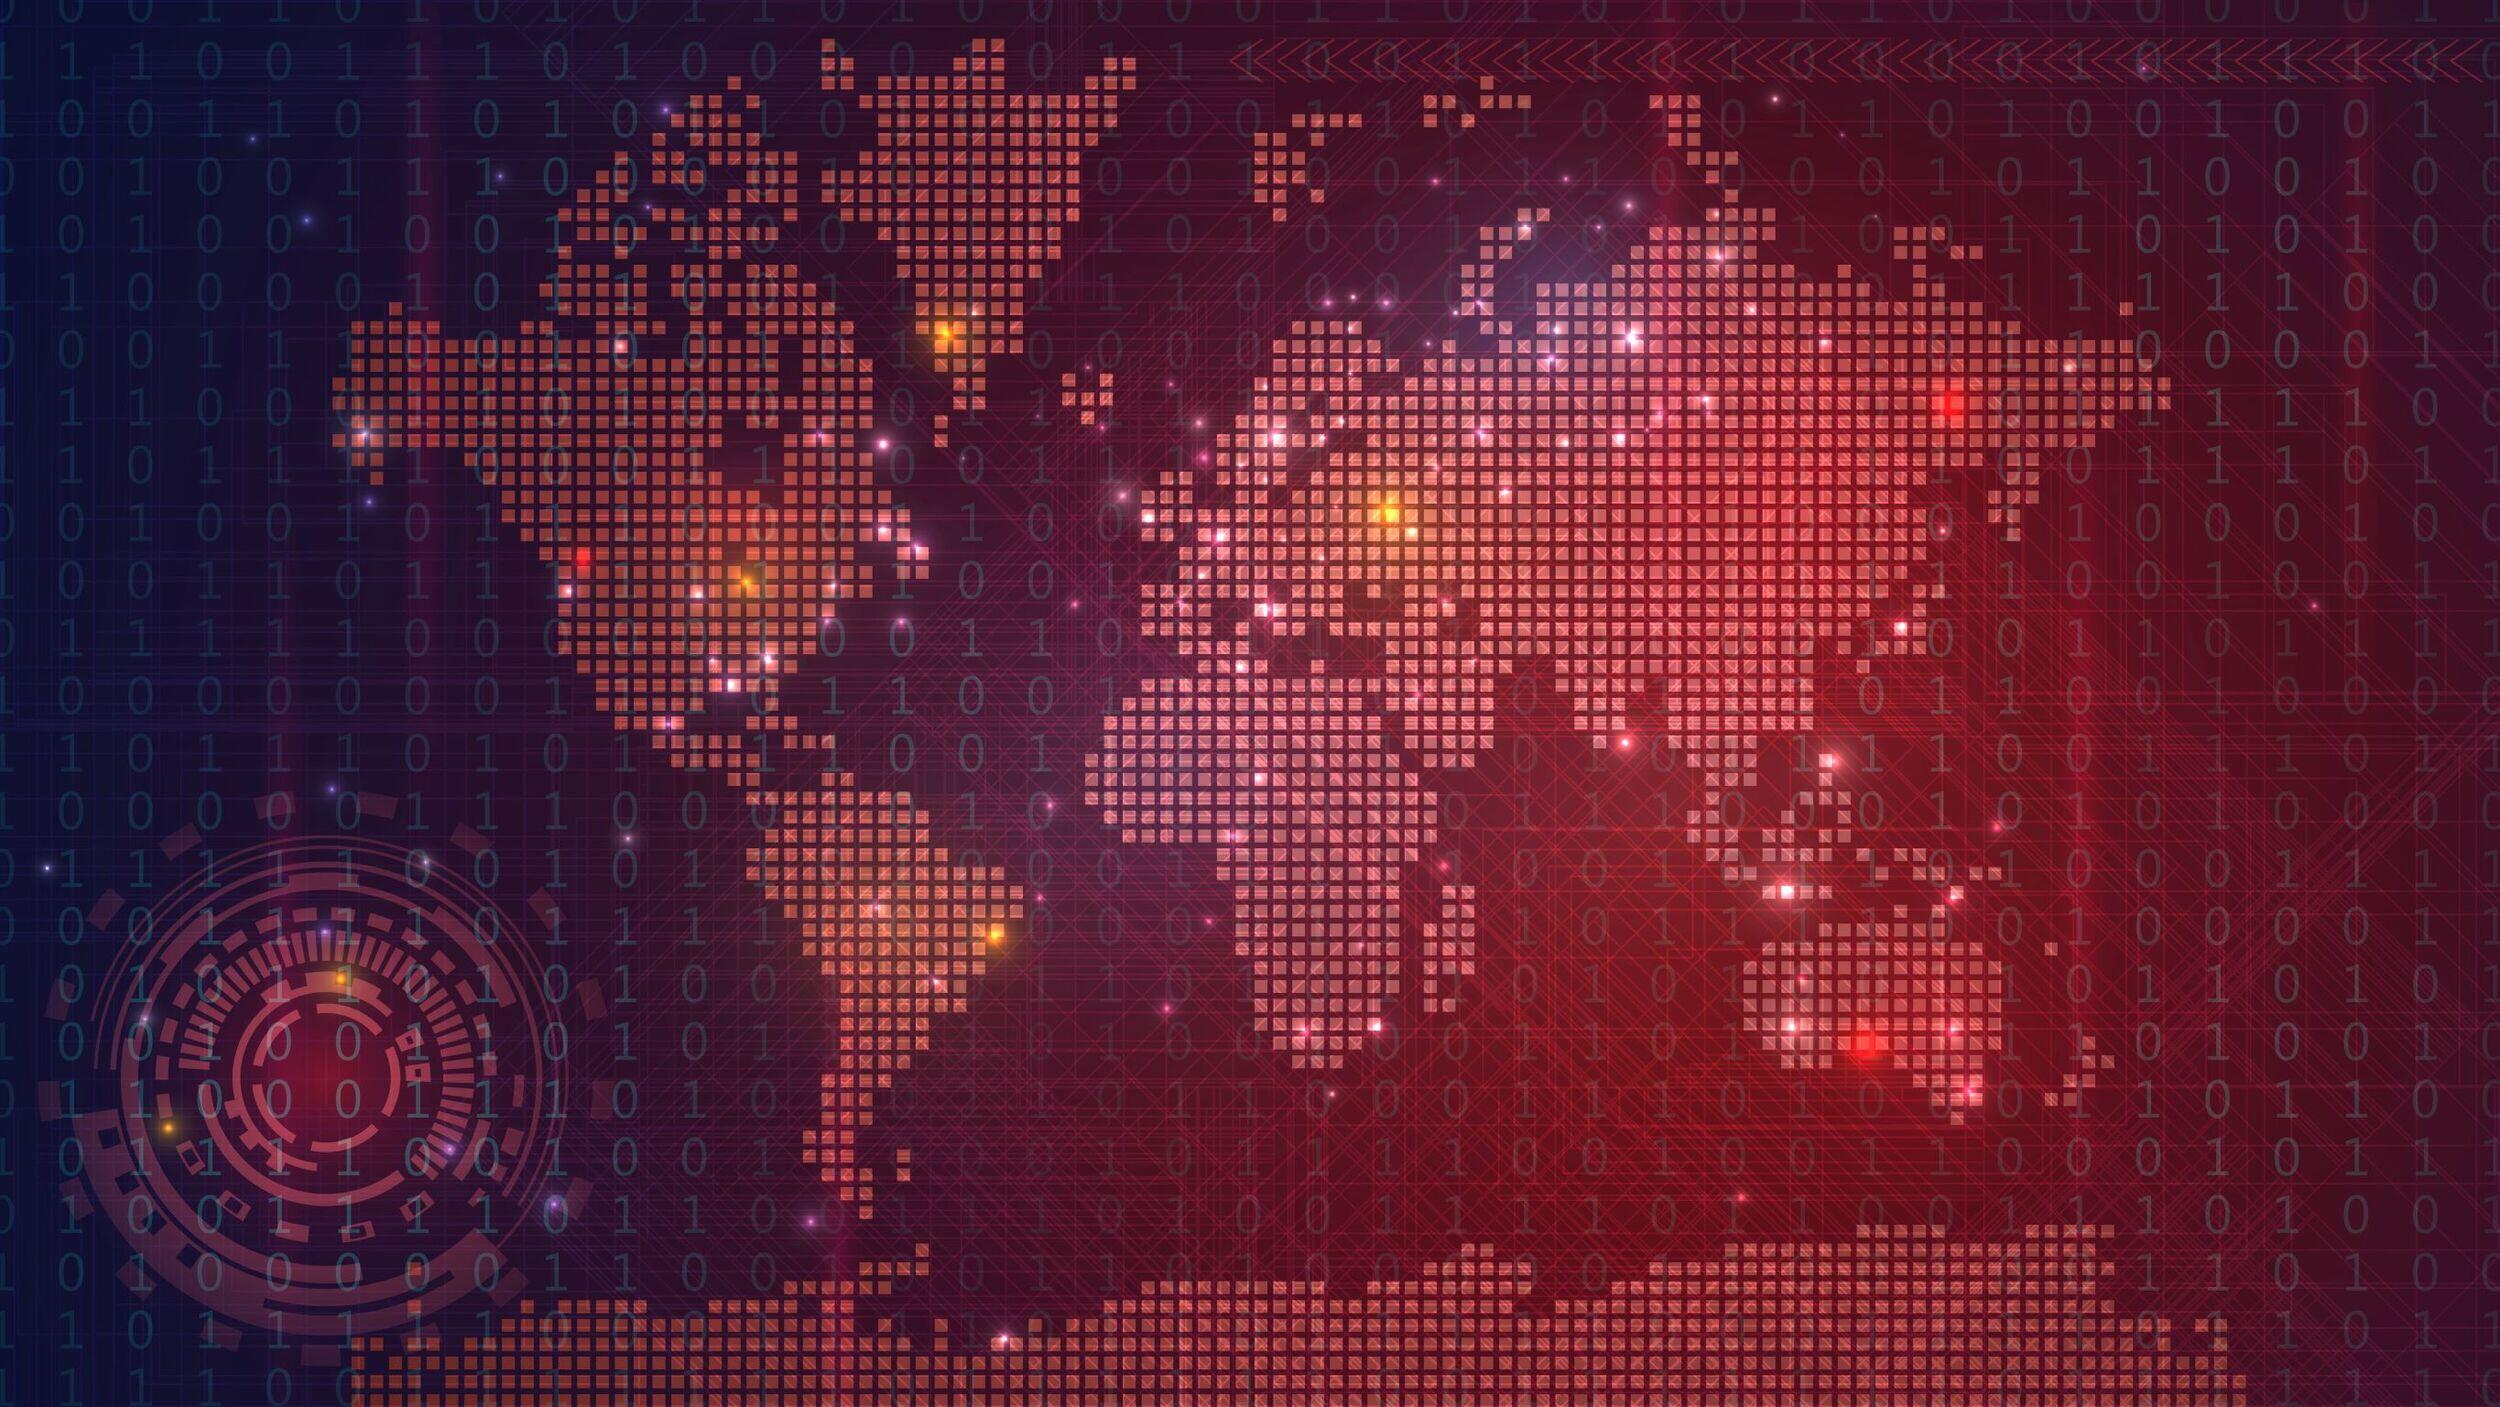 A map of the world made out of red dots that looks like it's part of a computer generated layout